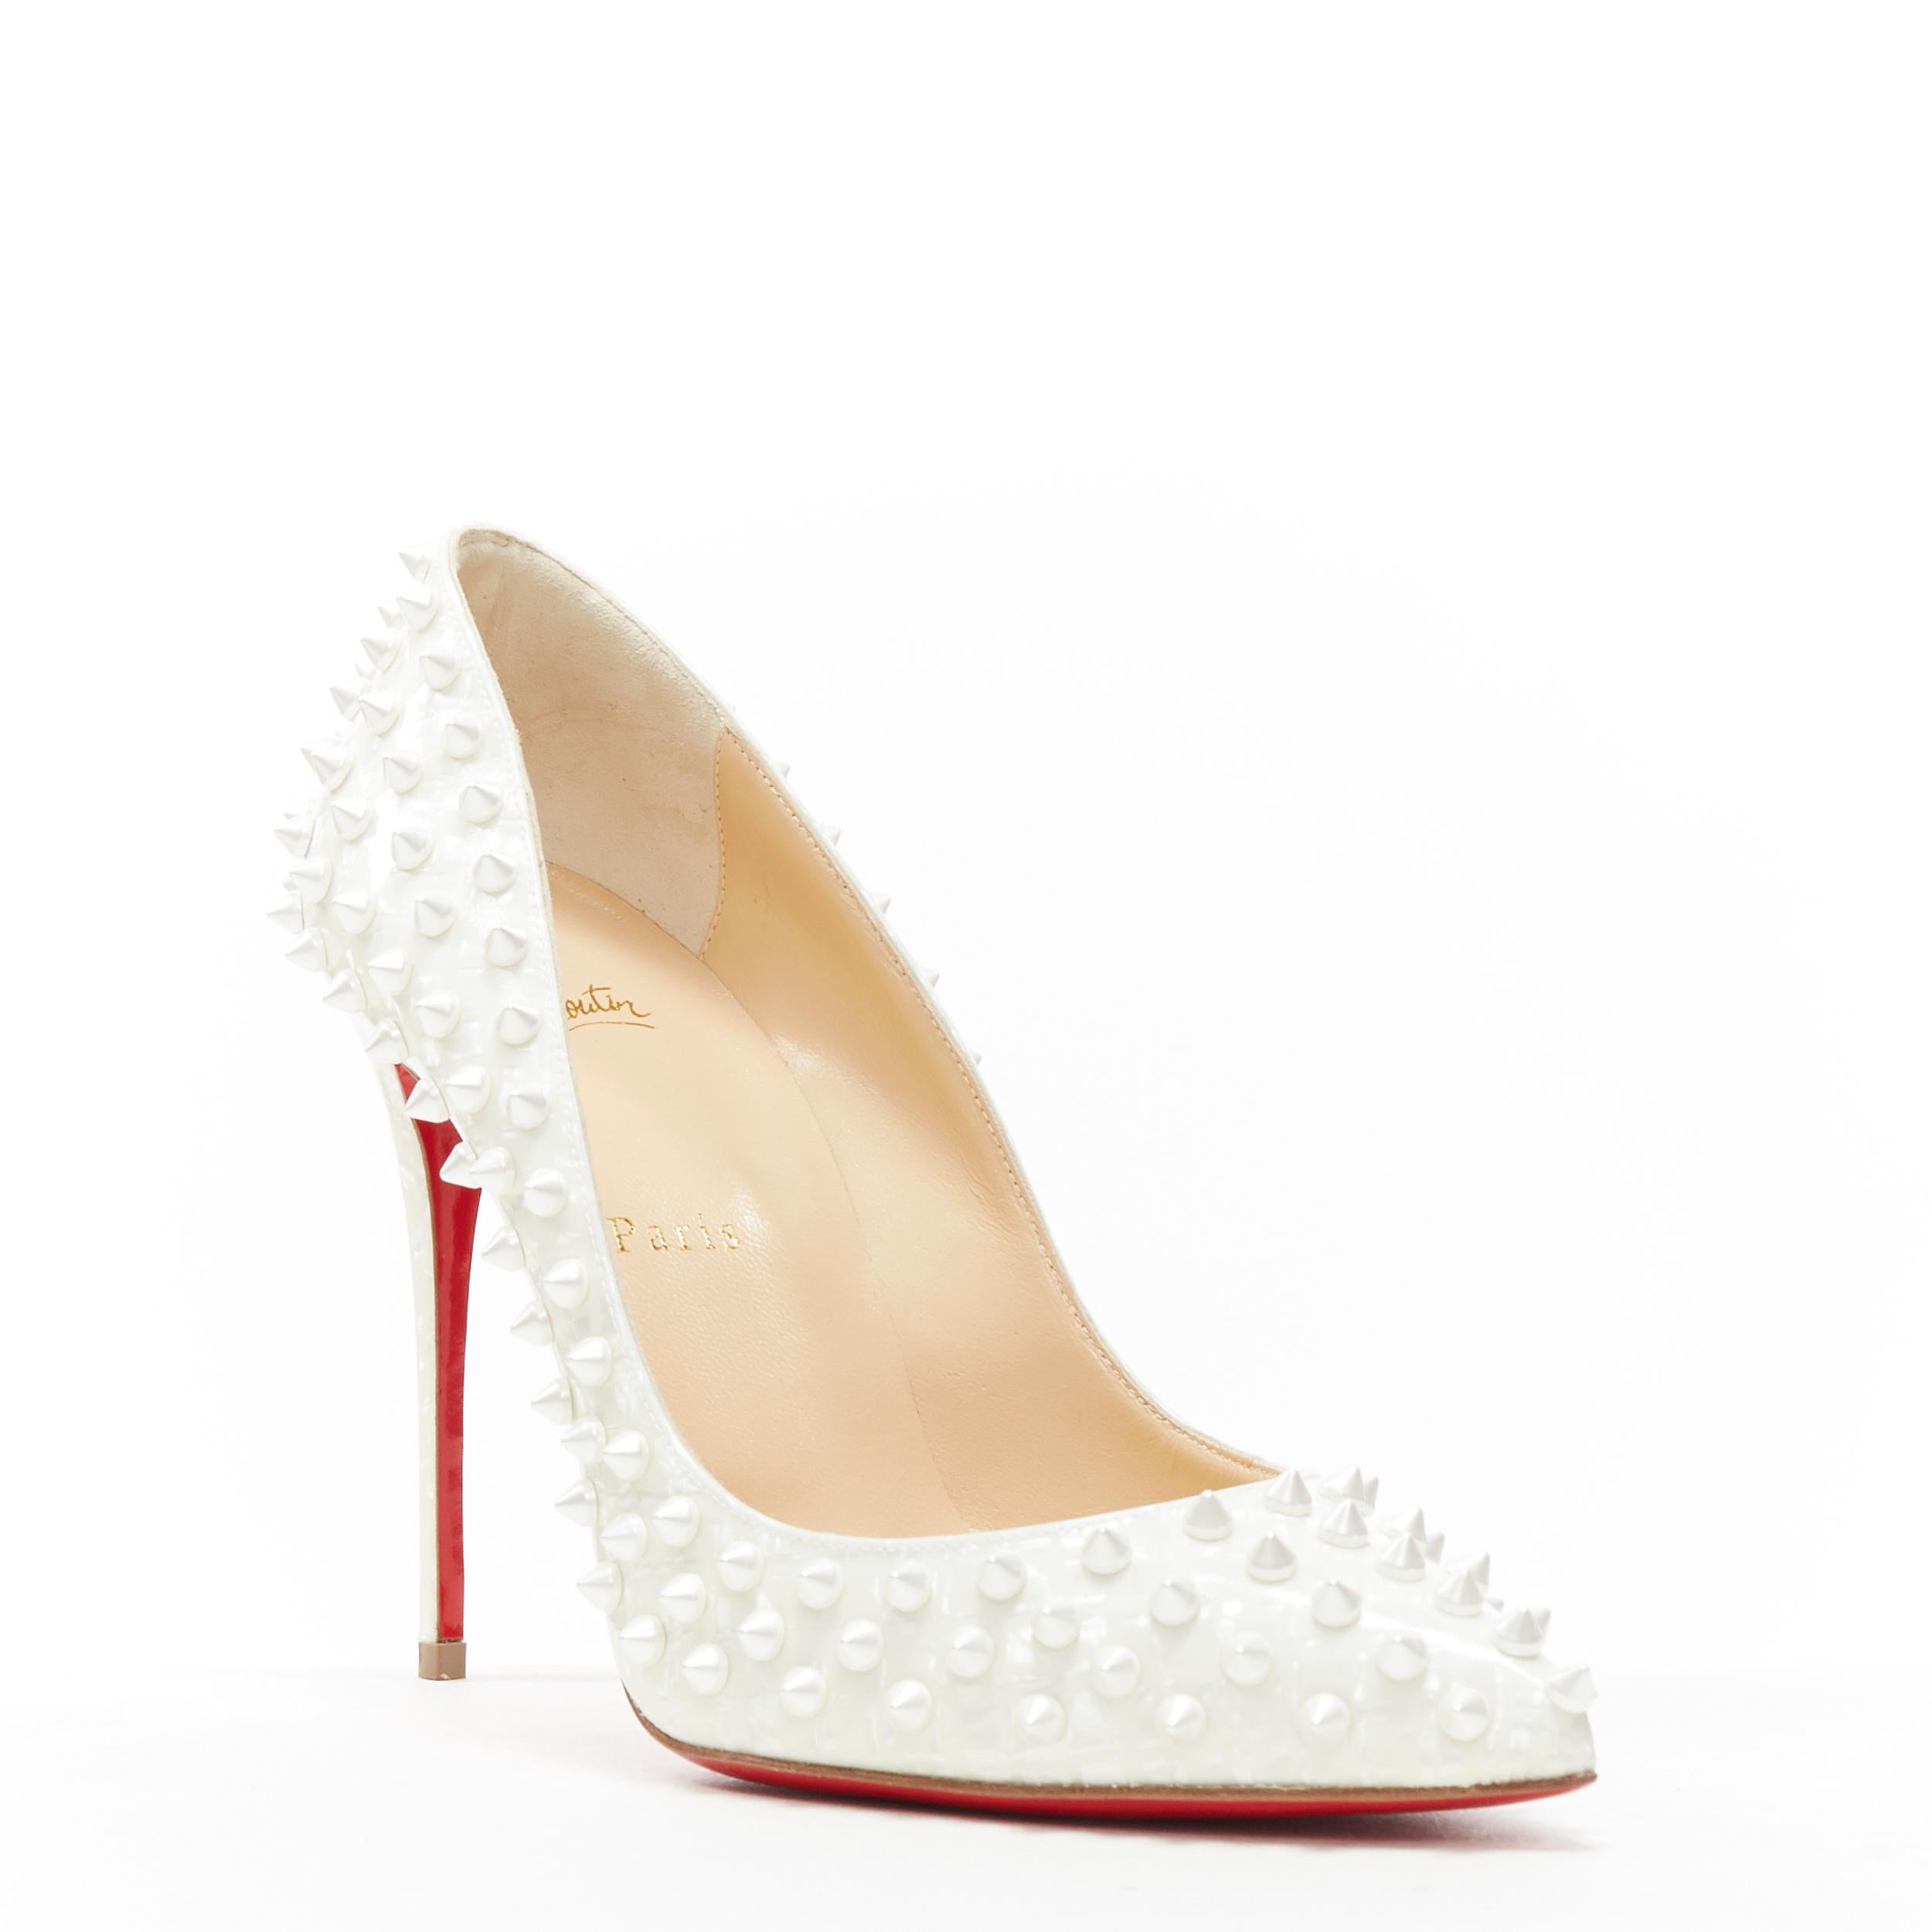 new CHRISTIAN LOUBOUTIN Follies Spikes pearl white spike stud patent pump EU39.5
Brand: Christian Louboutin
Designer: Christian Louboutin
Model Name / Style: Follies Spikes
Material: Patent leather
Color: White
Pattern: Solid
Extra Detail: Style